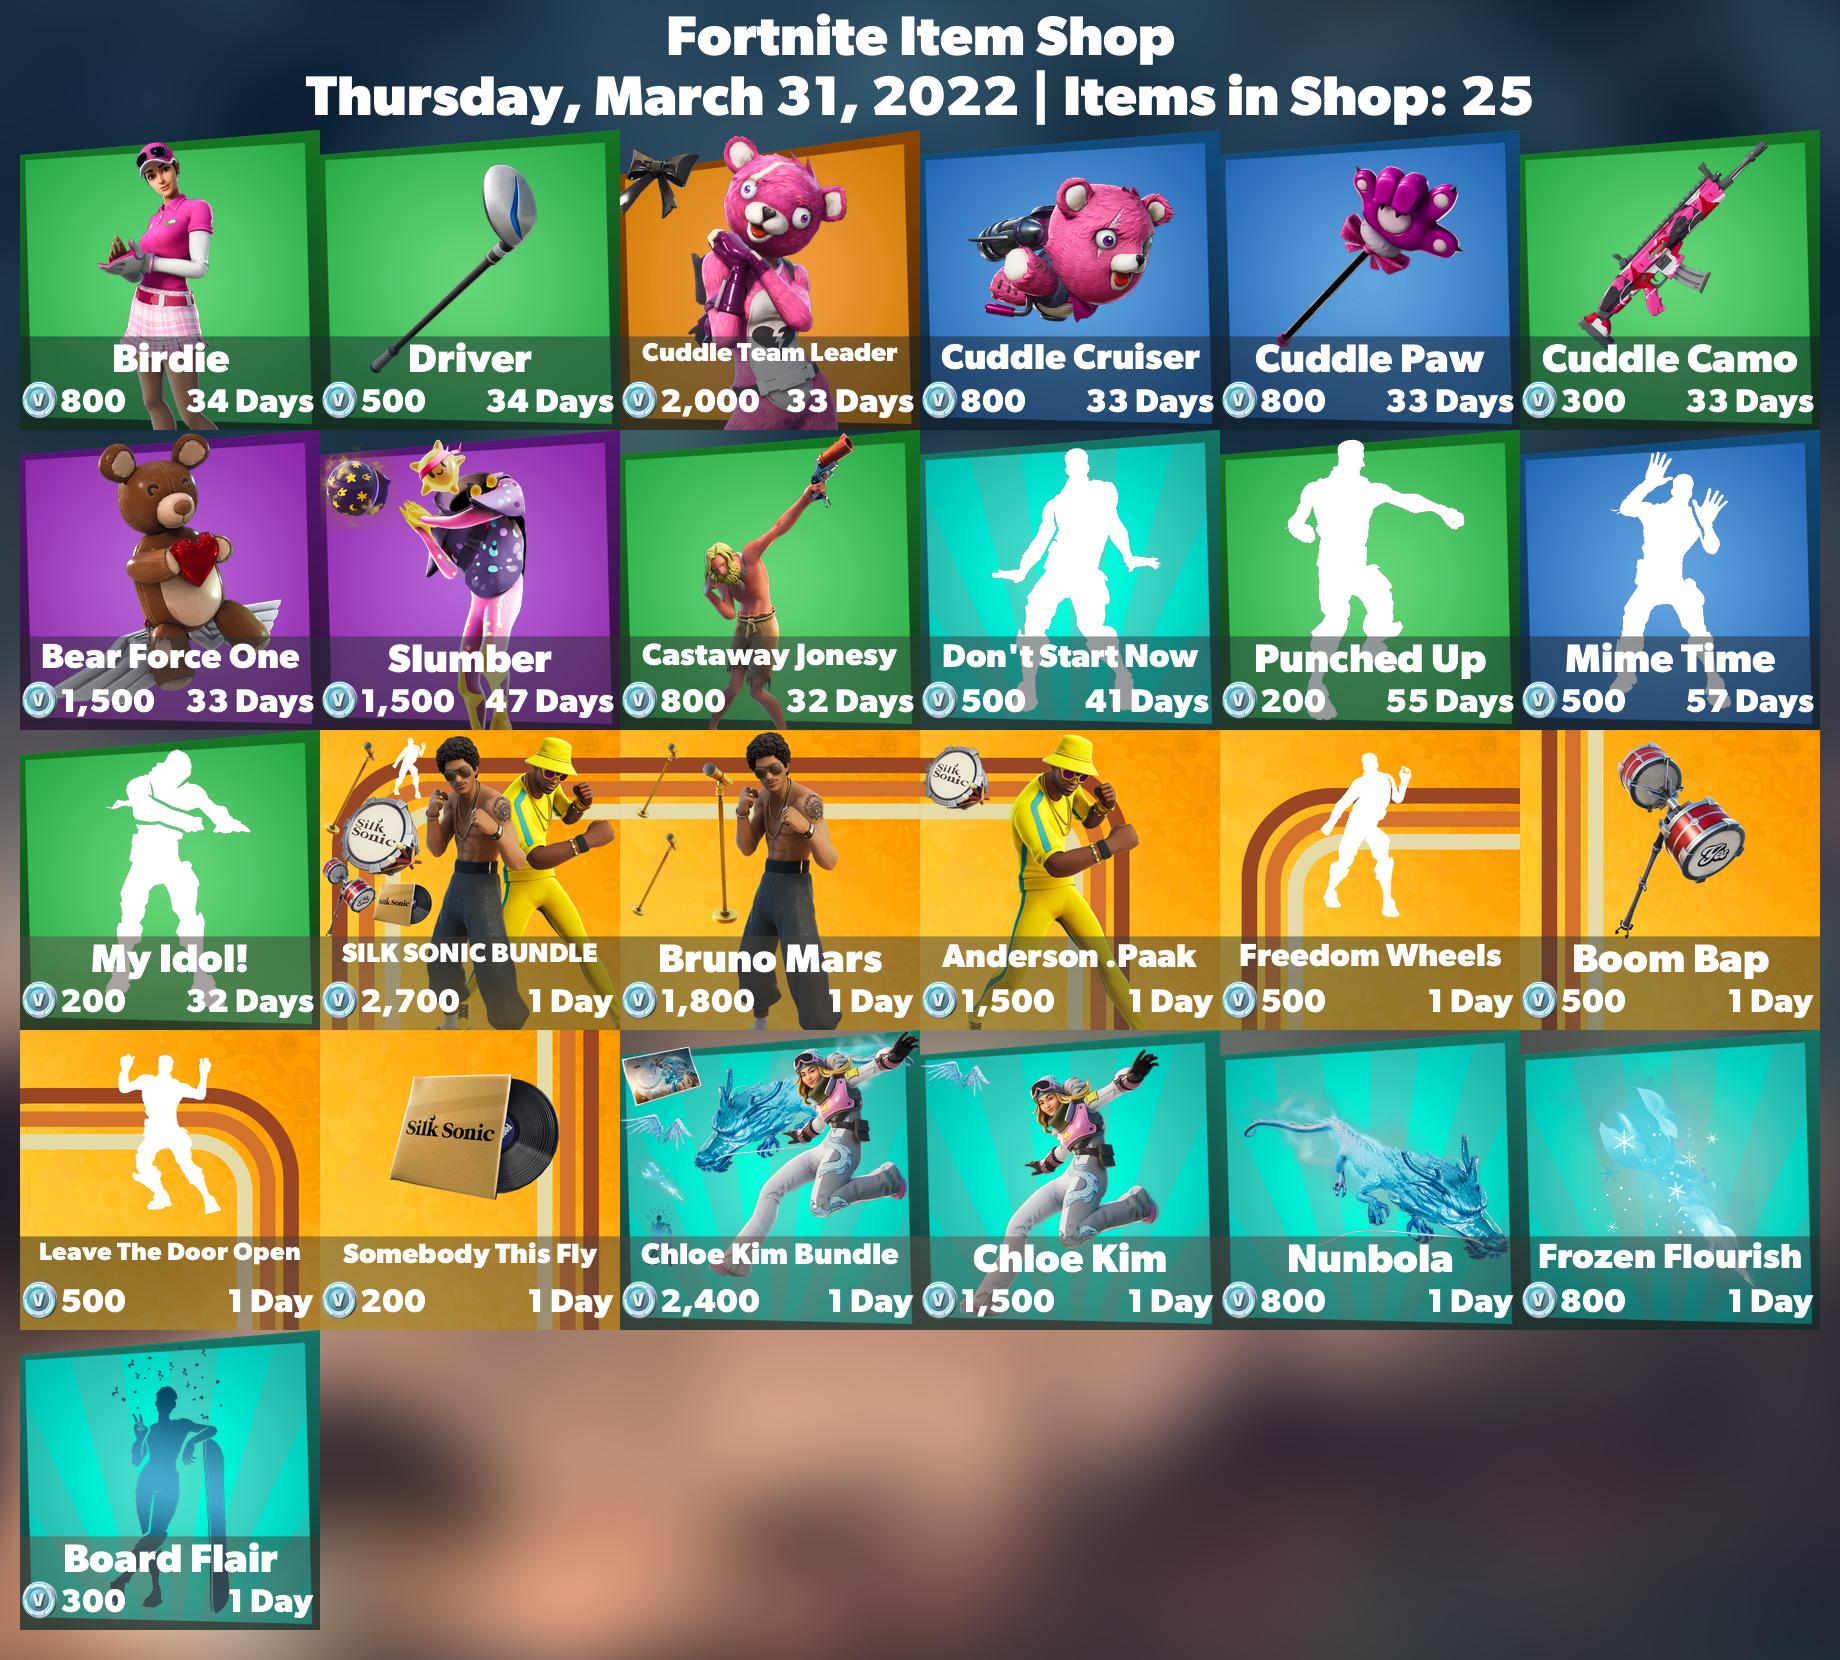 Roblox Promo Codes - Active Free Item Codes March 2022 - Fortnite Insider